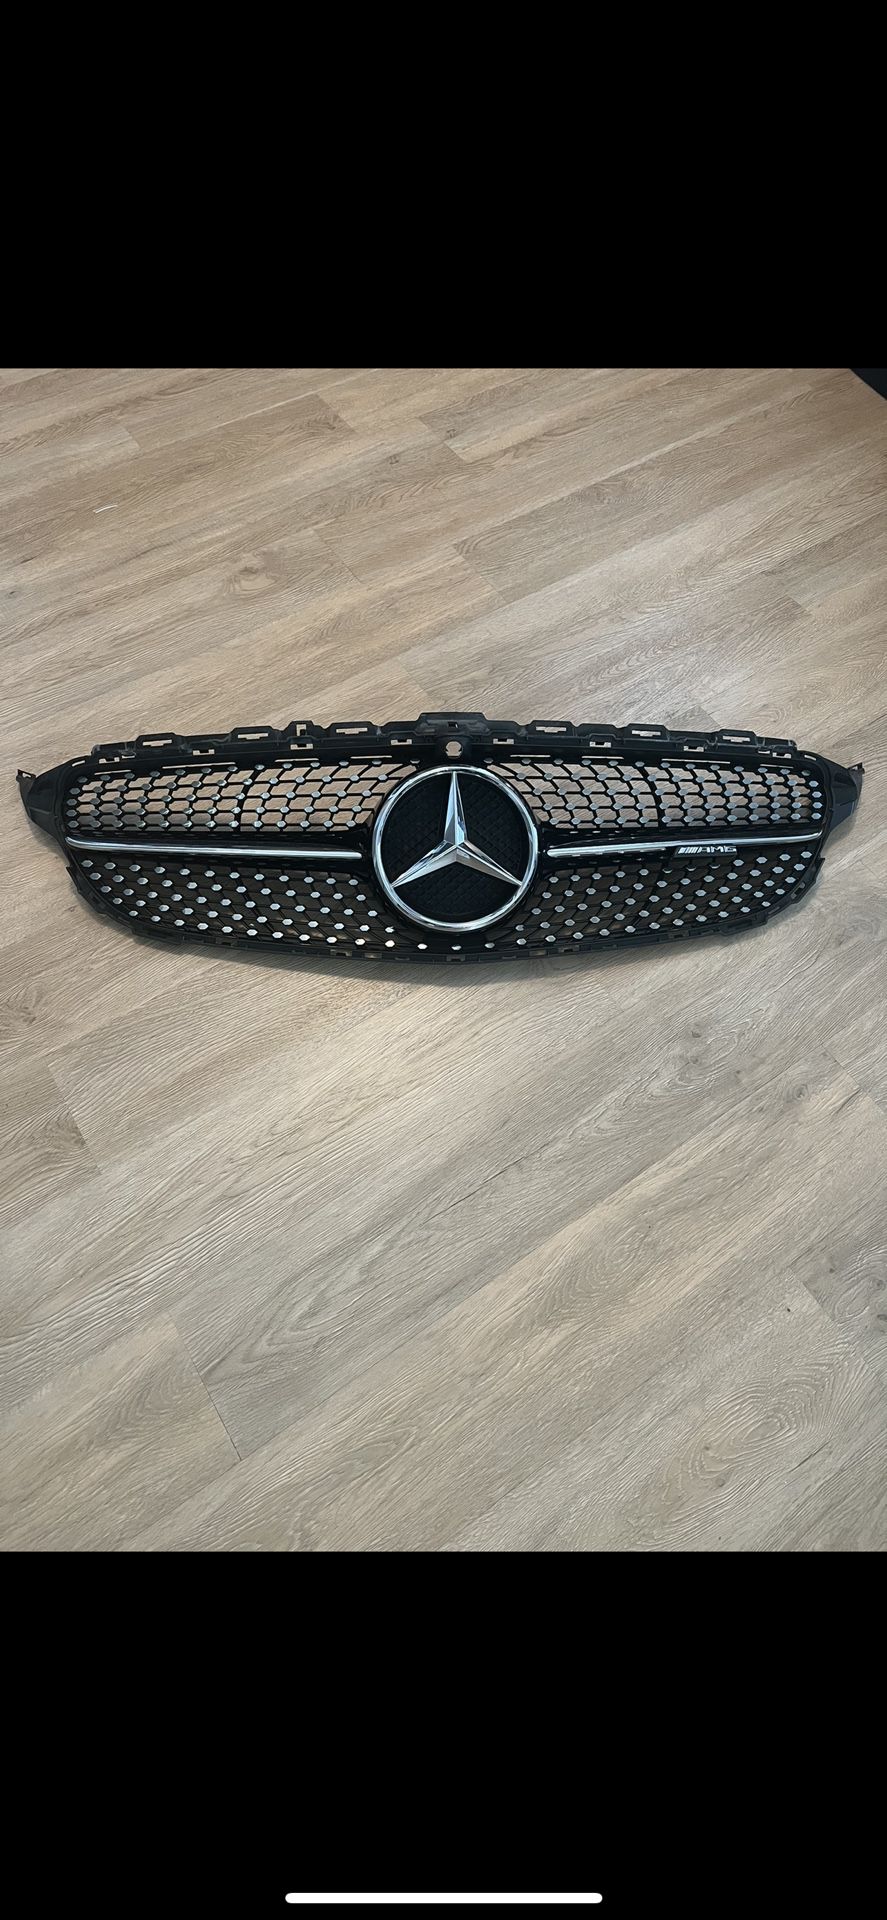 2017 Oem Amg Grille For C Class Mercedes 